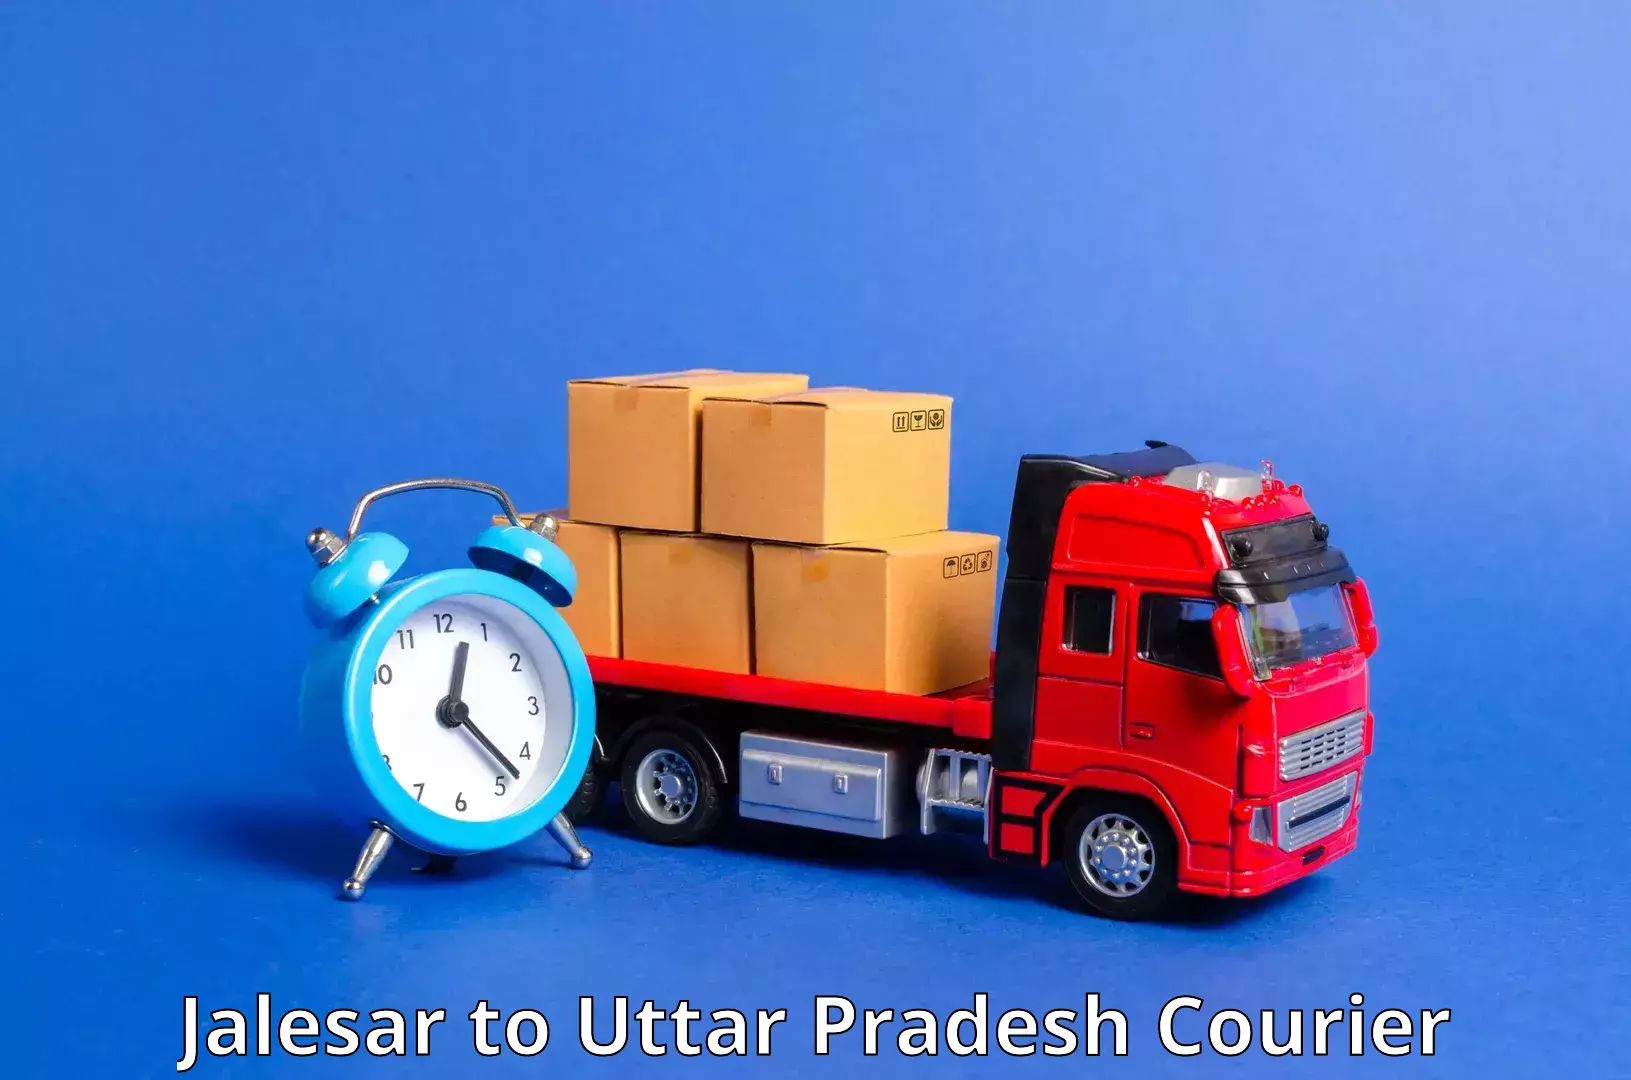 Bulk courier orders Jalesar to Lucknow